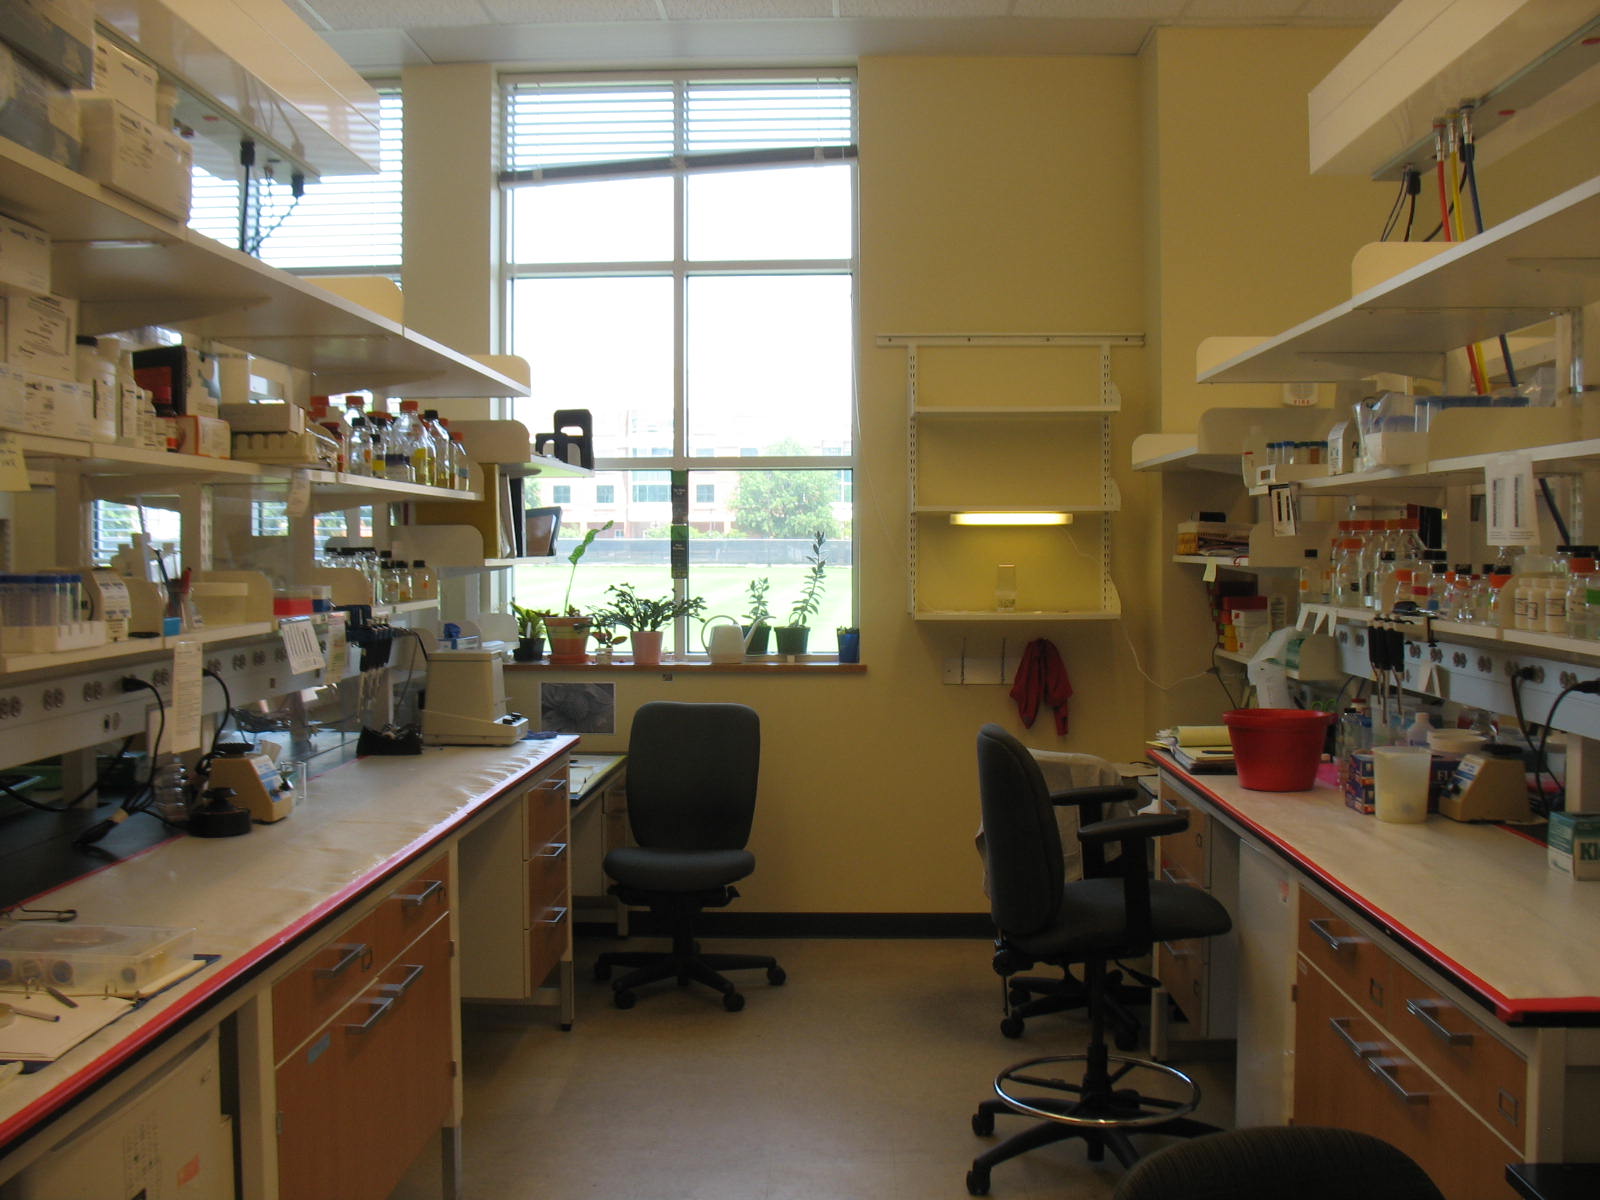  As a graduate student, you would have access to state-of-the-art research labs. 